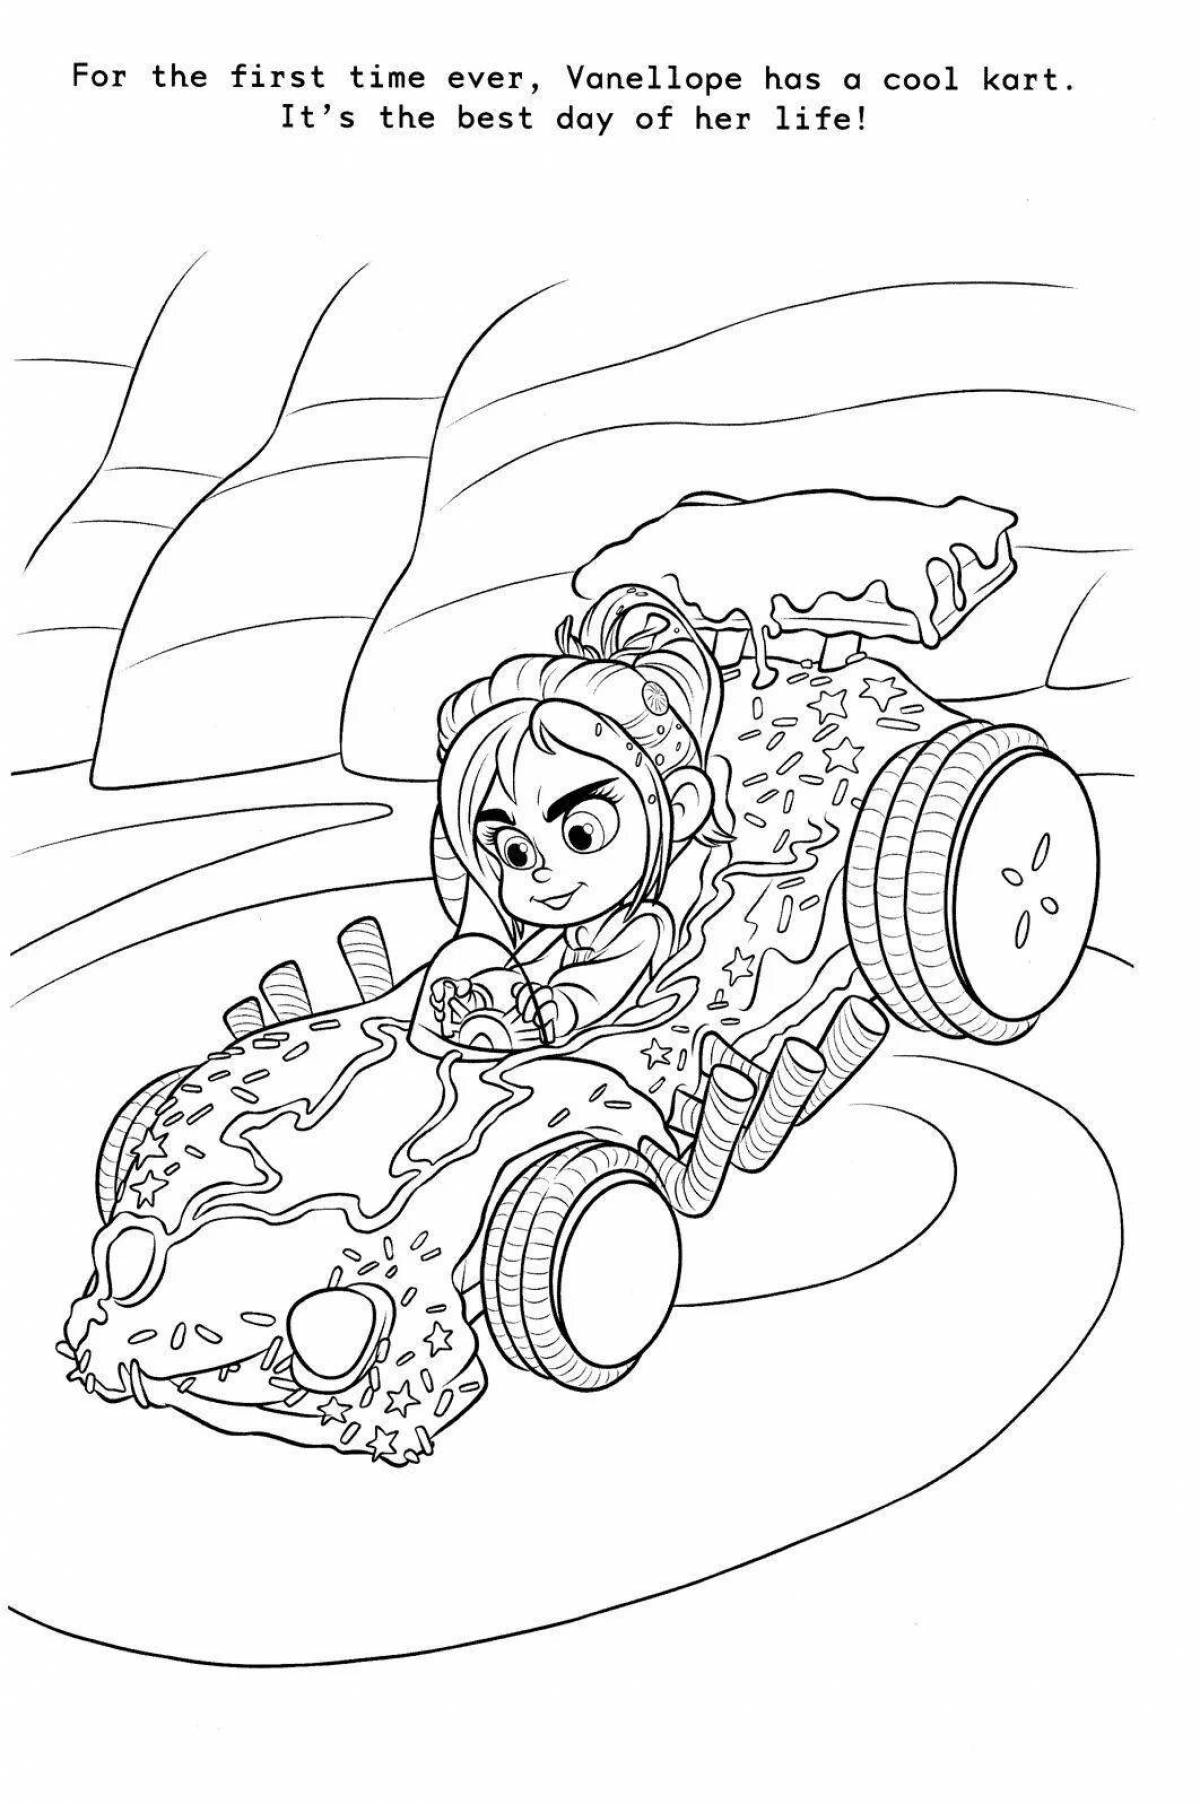 Glittering penelope coloring page